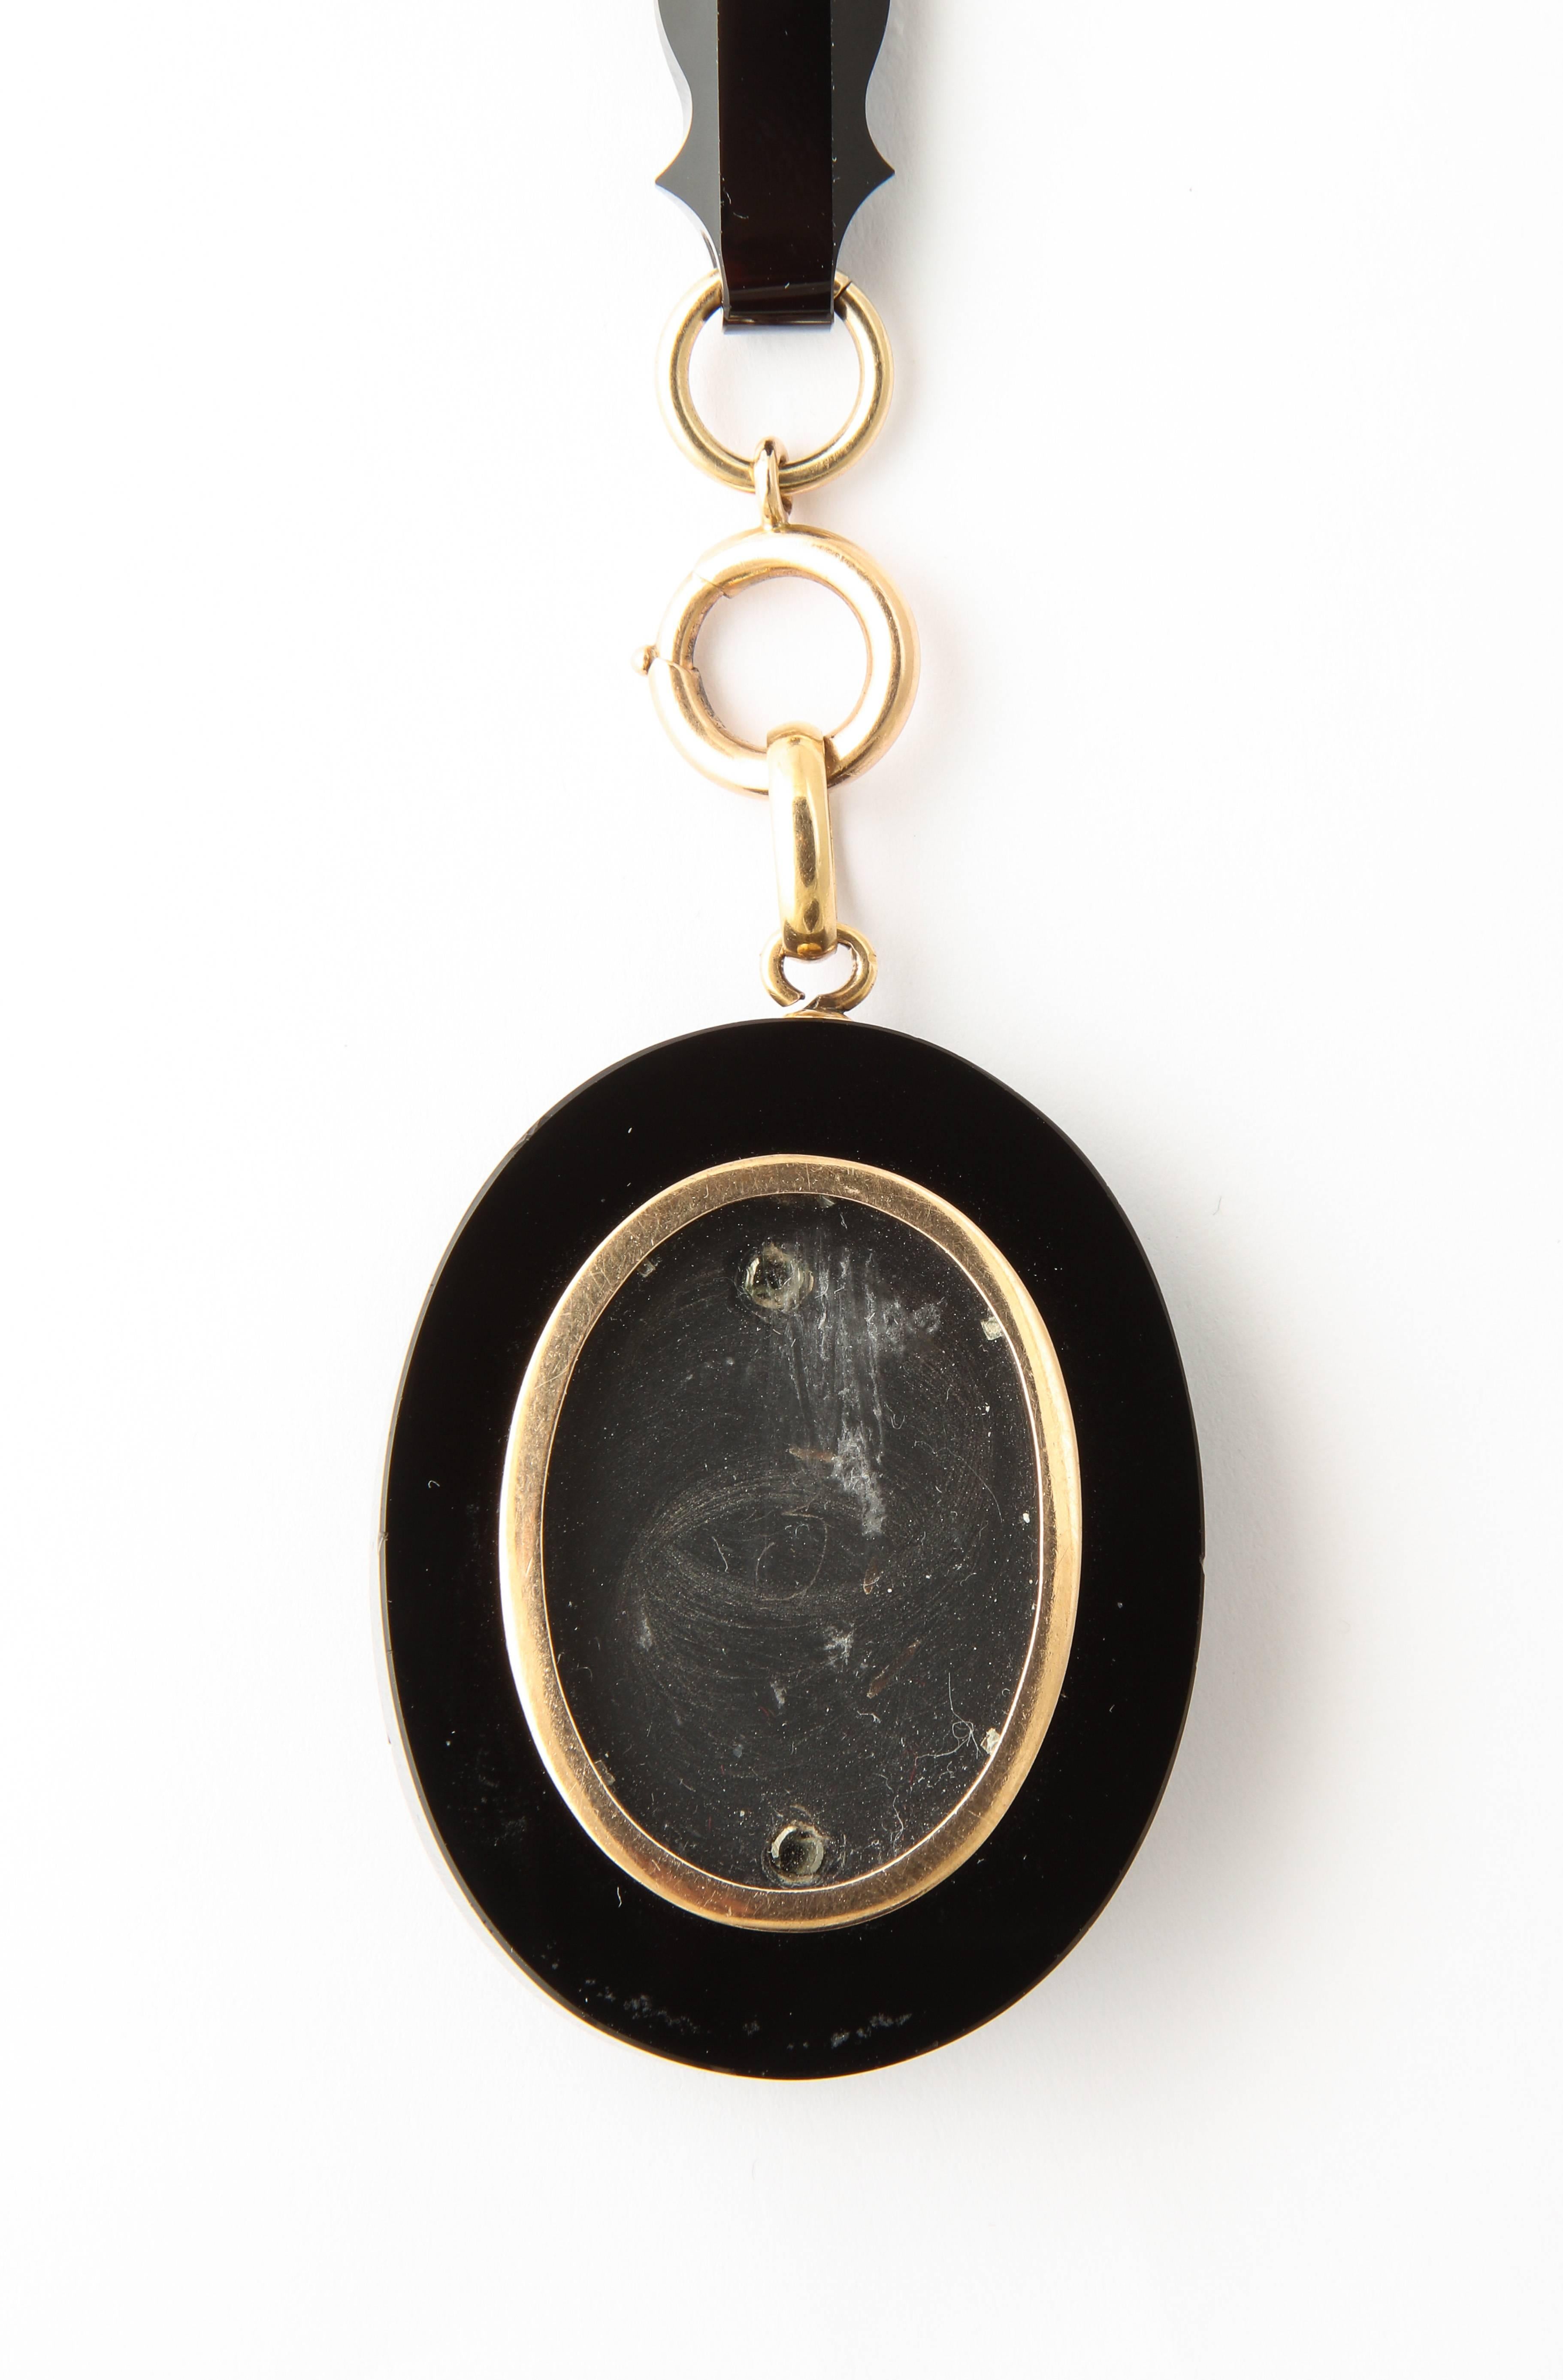 A wonderful period antique onyx and 18 kt chain and locket set from the late 1800s with a floral decoration in gold and seed pearls